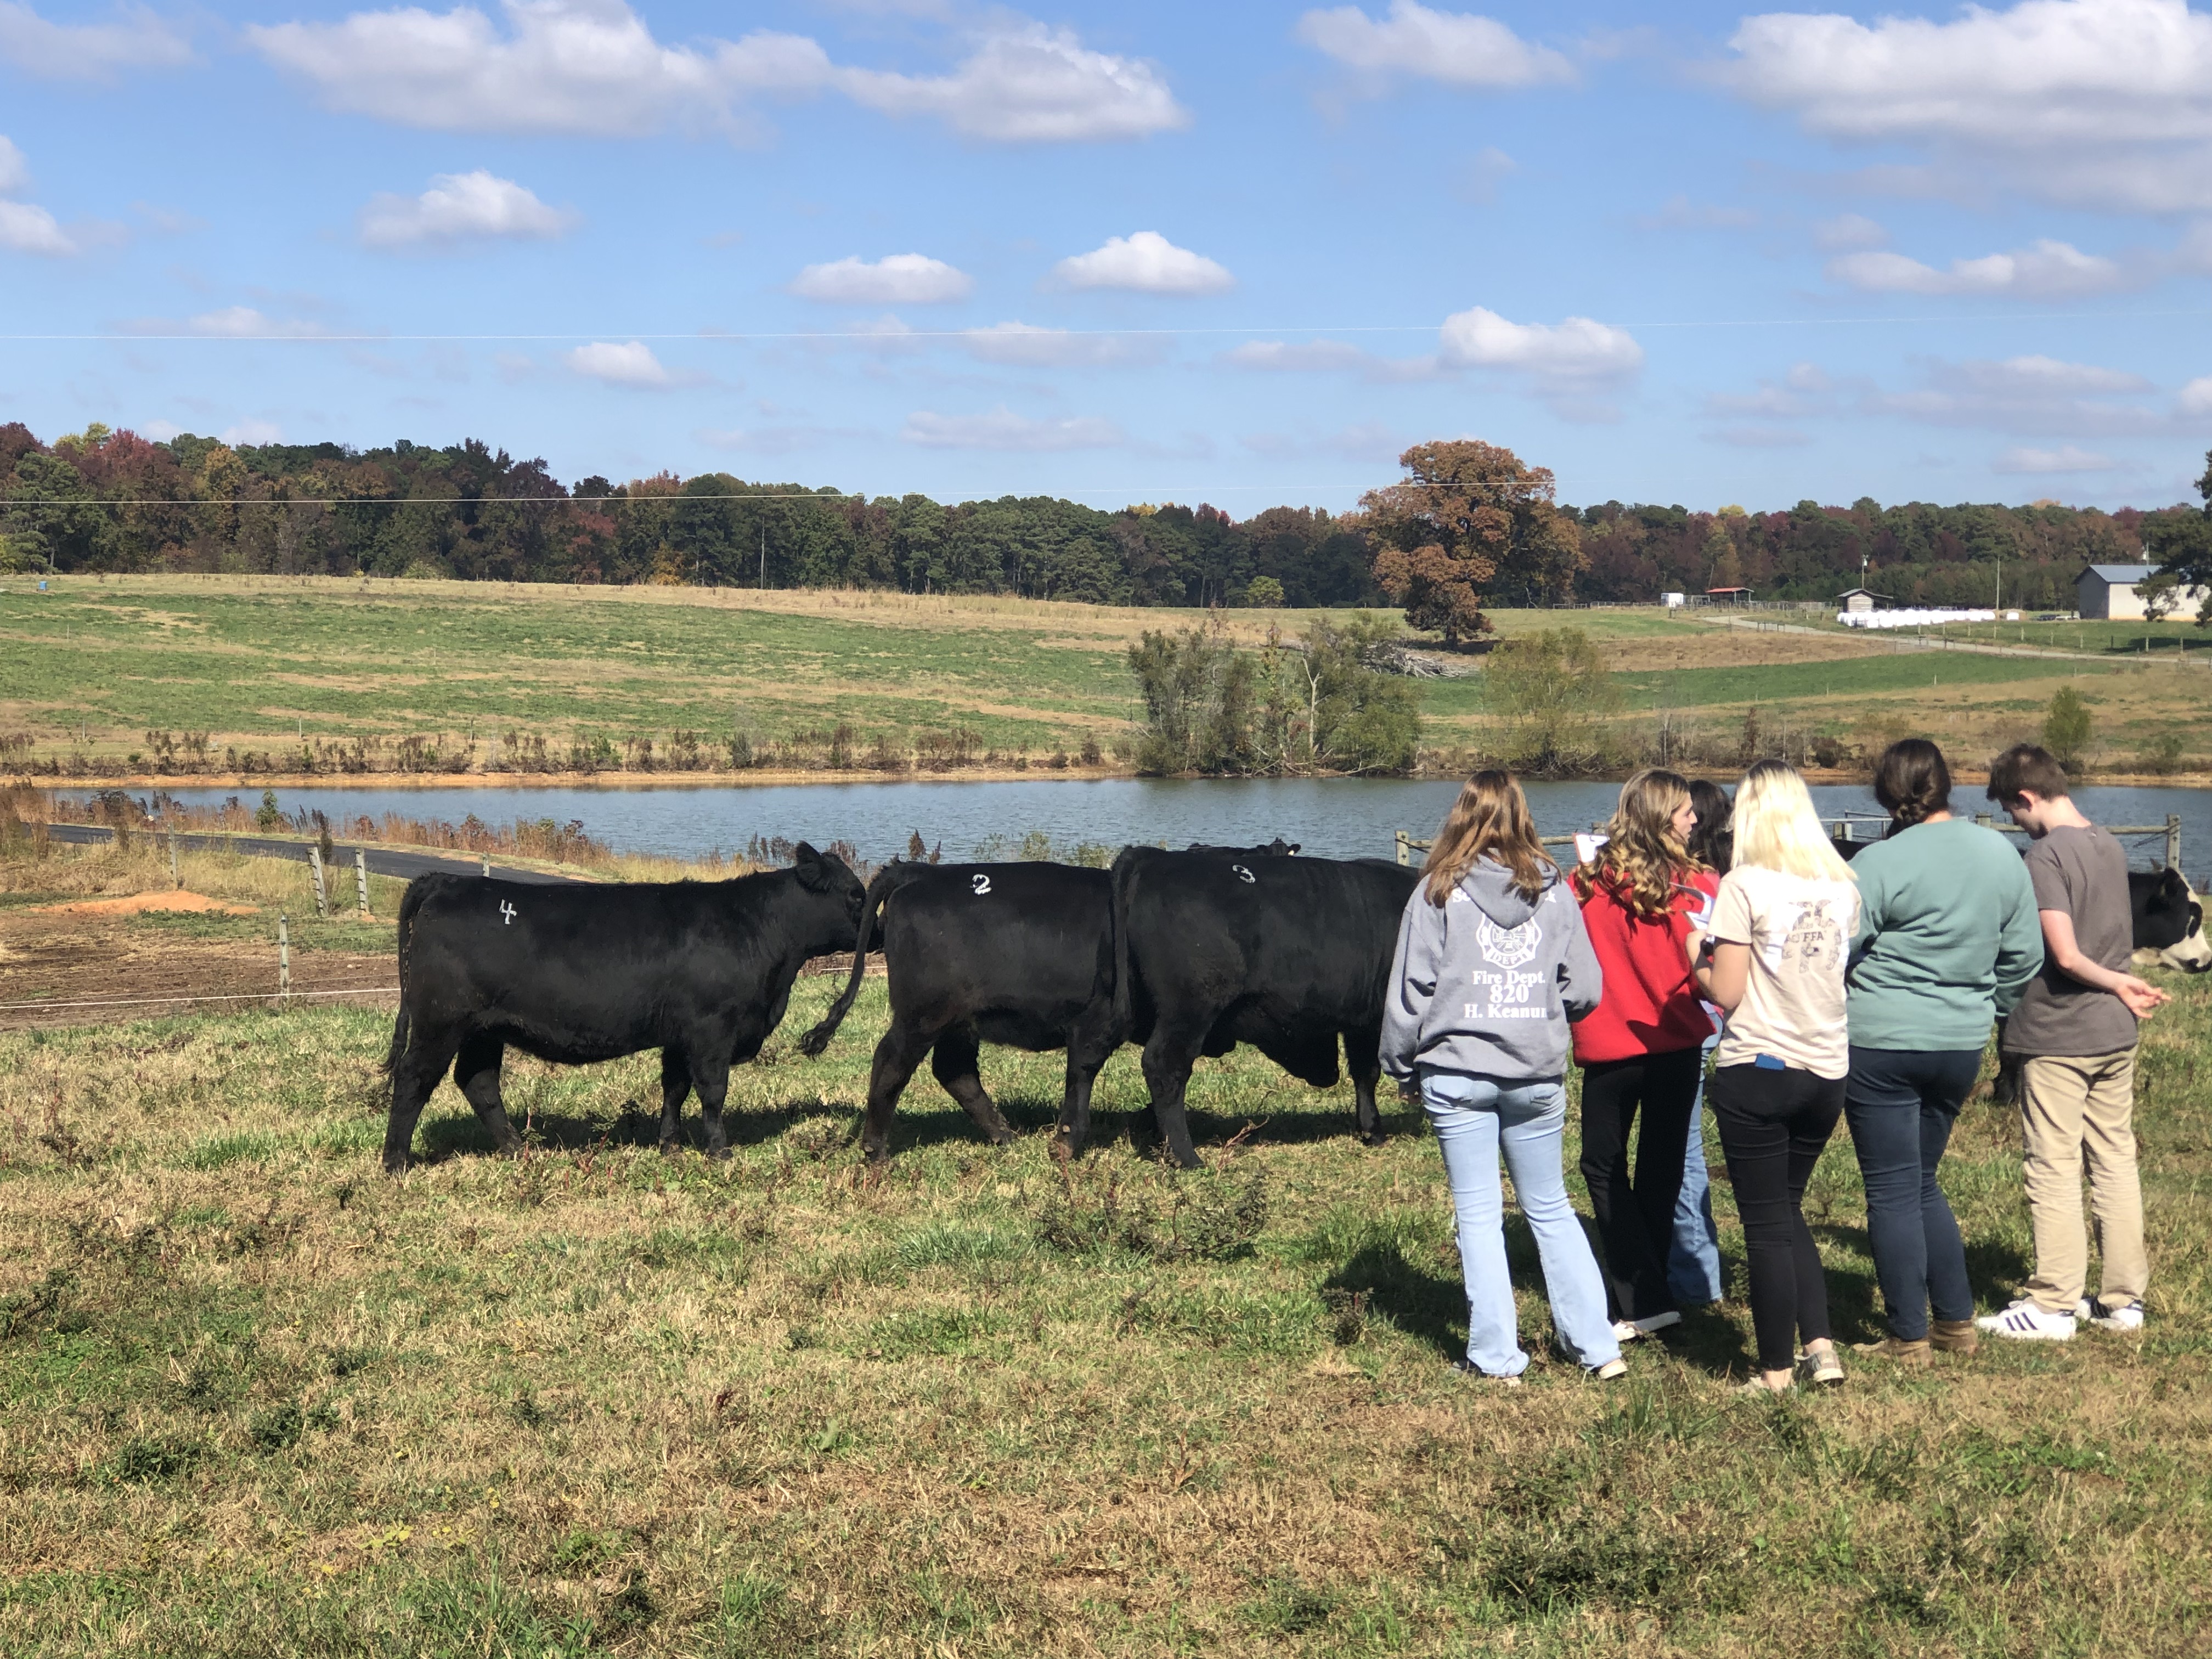 Youth looking at cattle in a field with pond in background